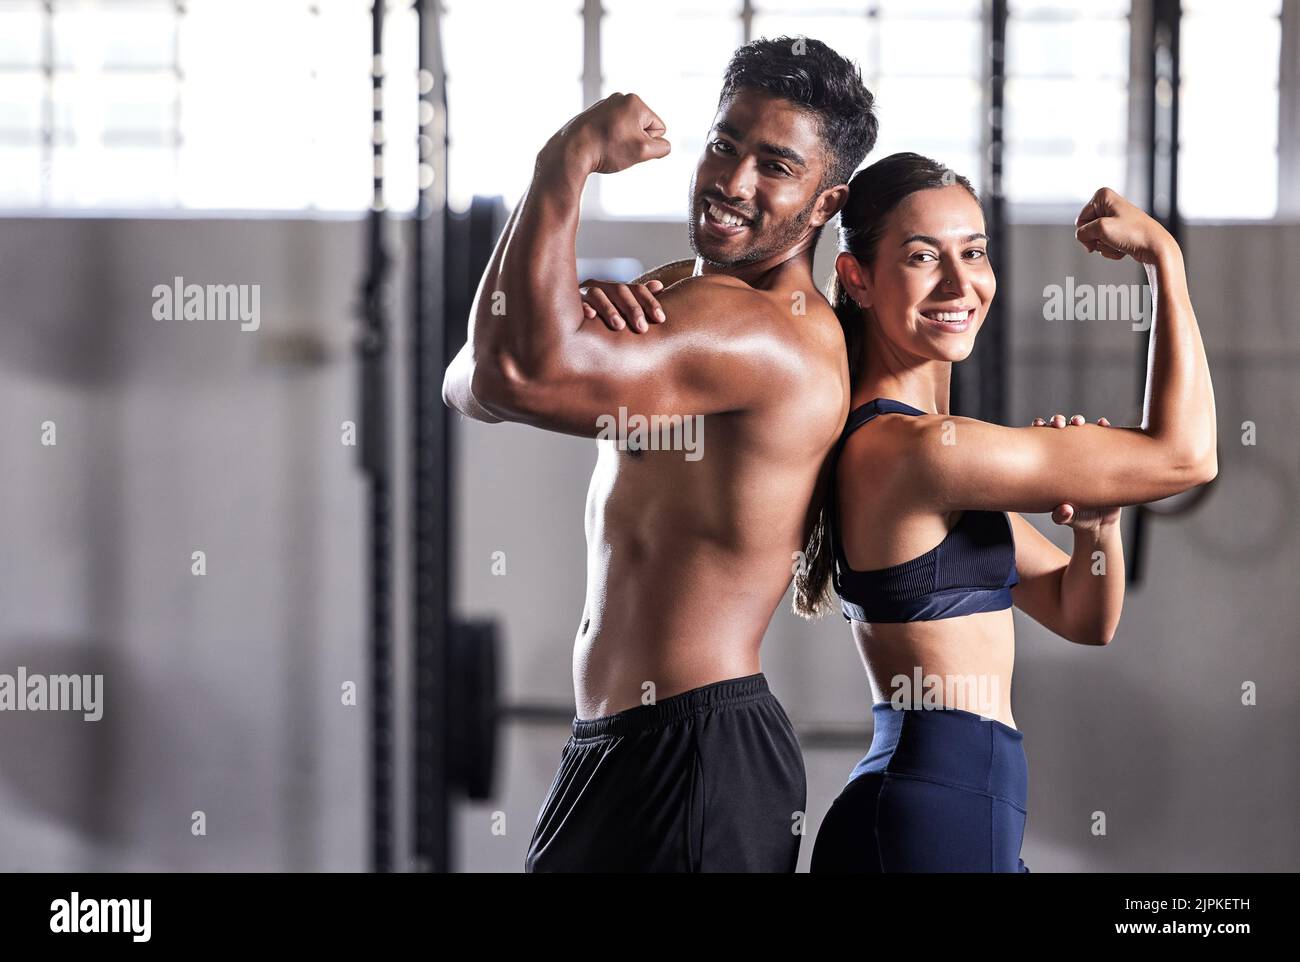 Fitness, flexing muscles and strong couple goals while doing exercise or training in a gym. Portrait of fit sports people, woman or man showing off Stock Photo